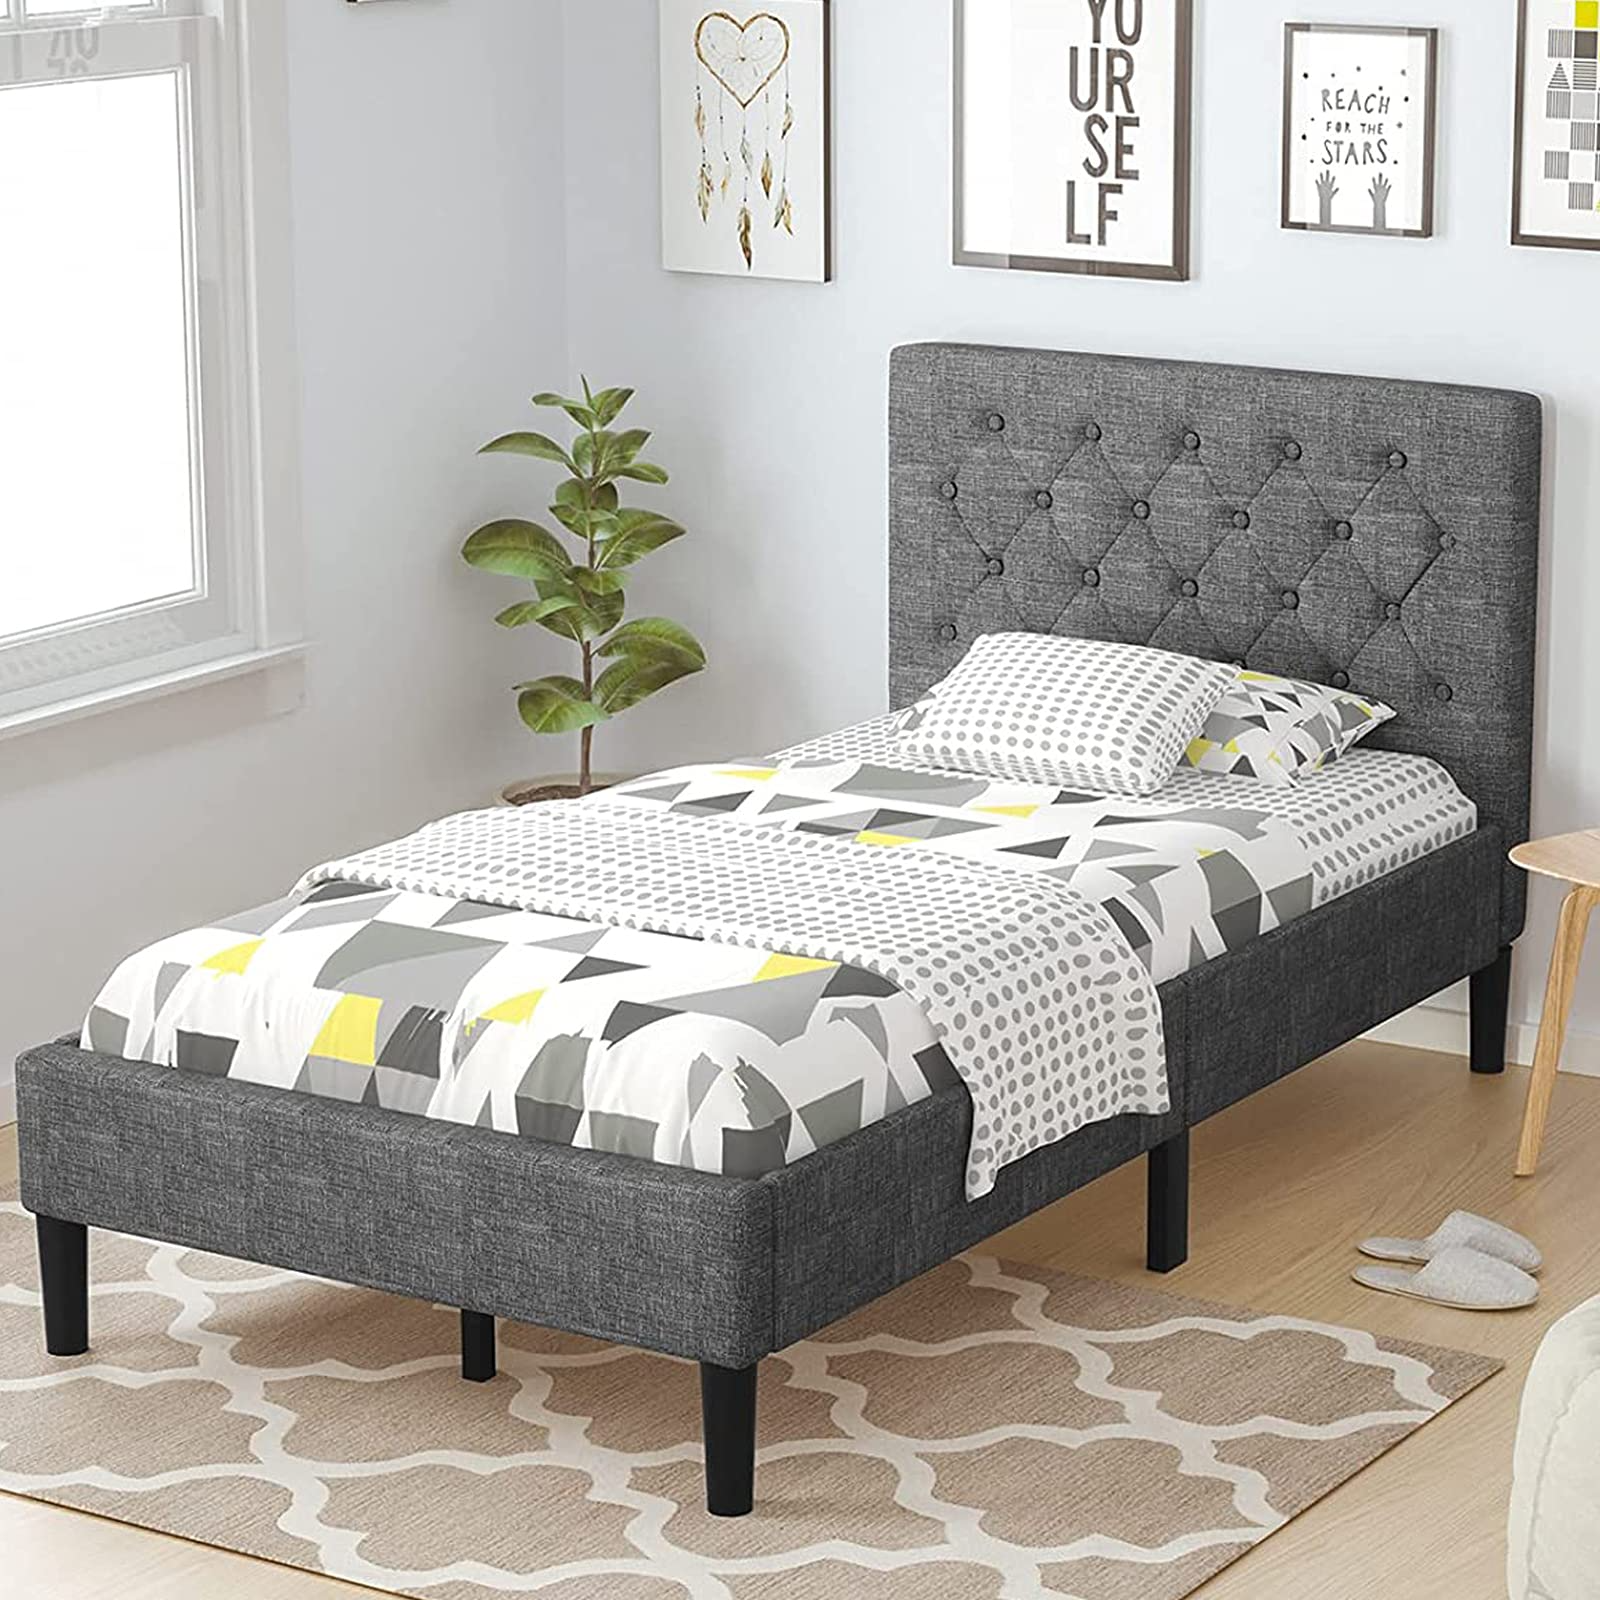 Elegant & Modern Style Upholstered Stable Bed Base with Button Stitched Headboard